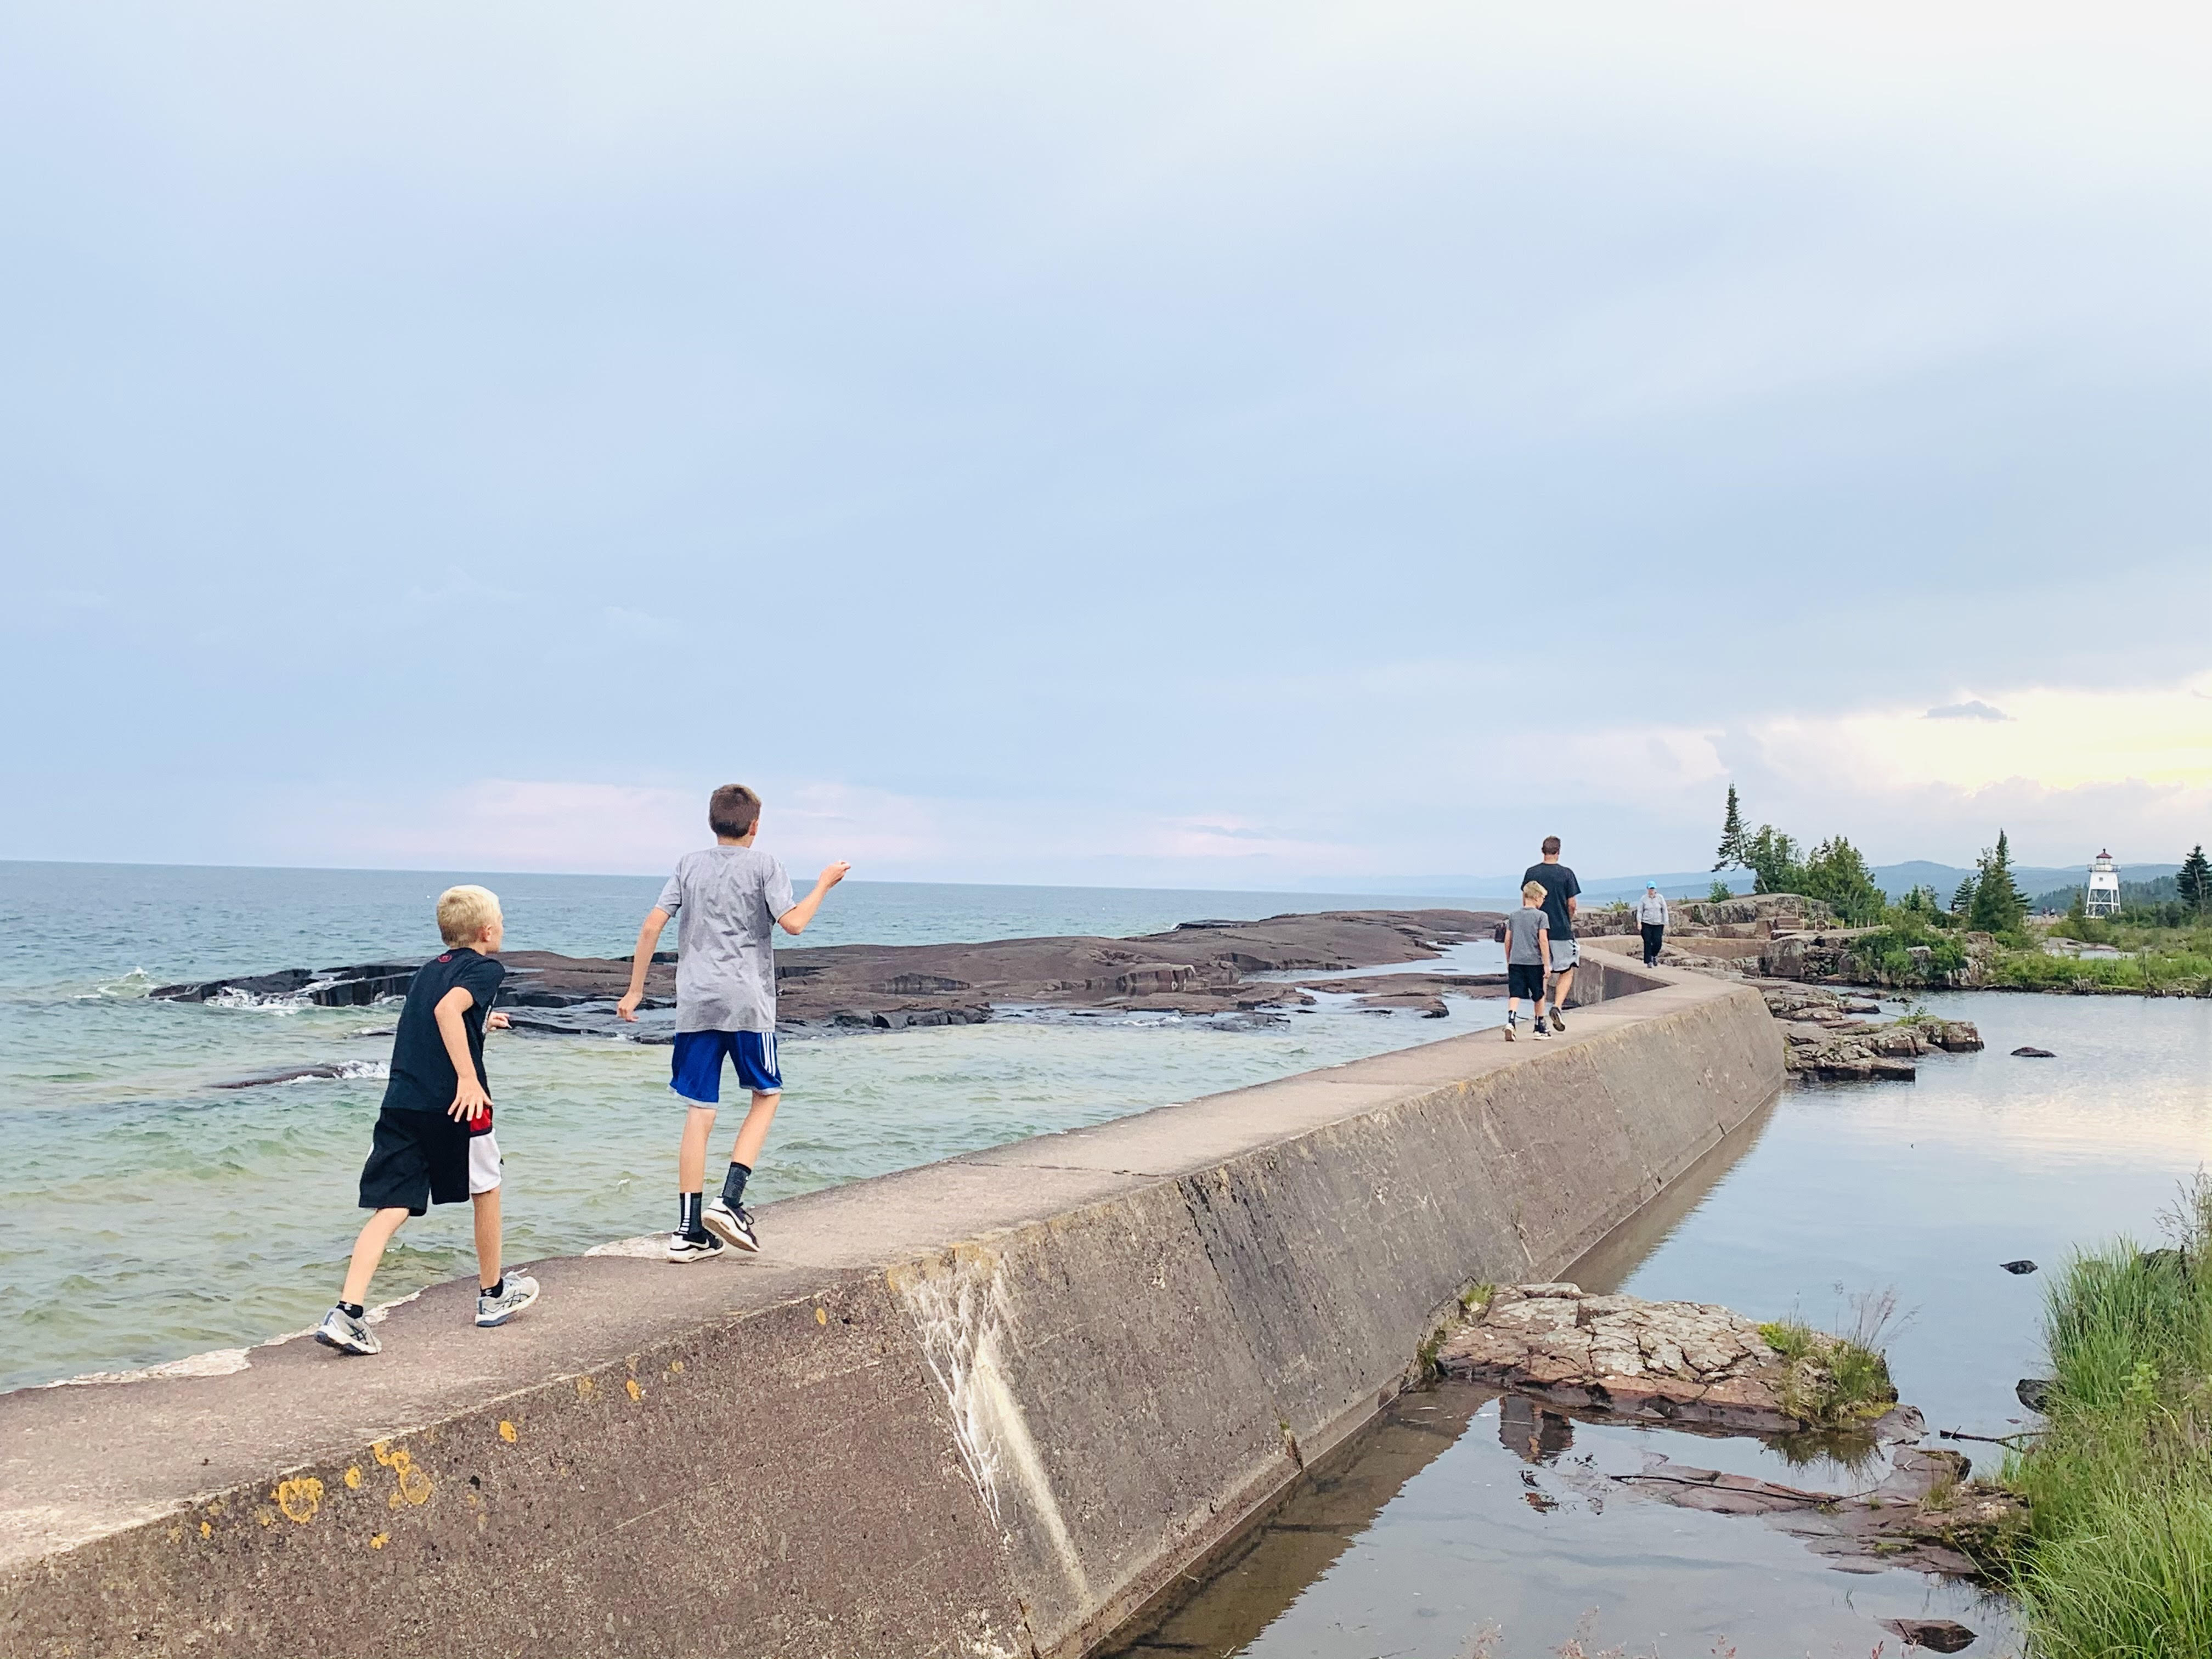 Discover the best things to do in Grand Marais from Top US Family Travel Blog, Travel With A Plan.